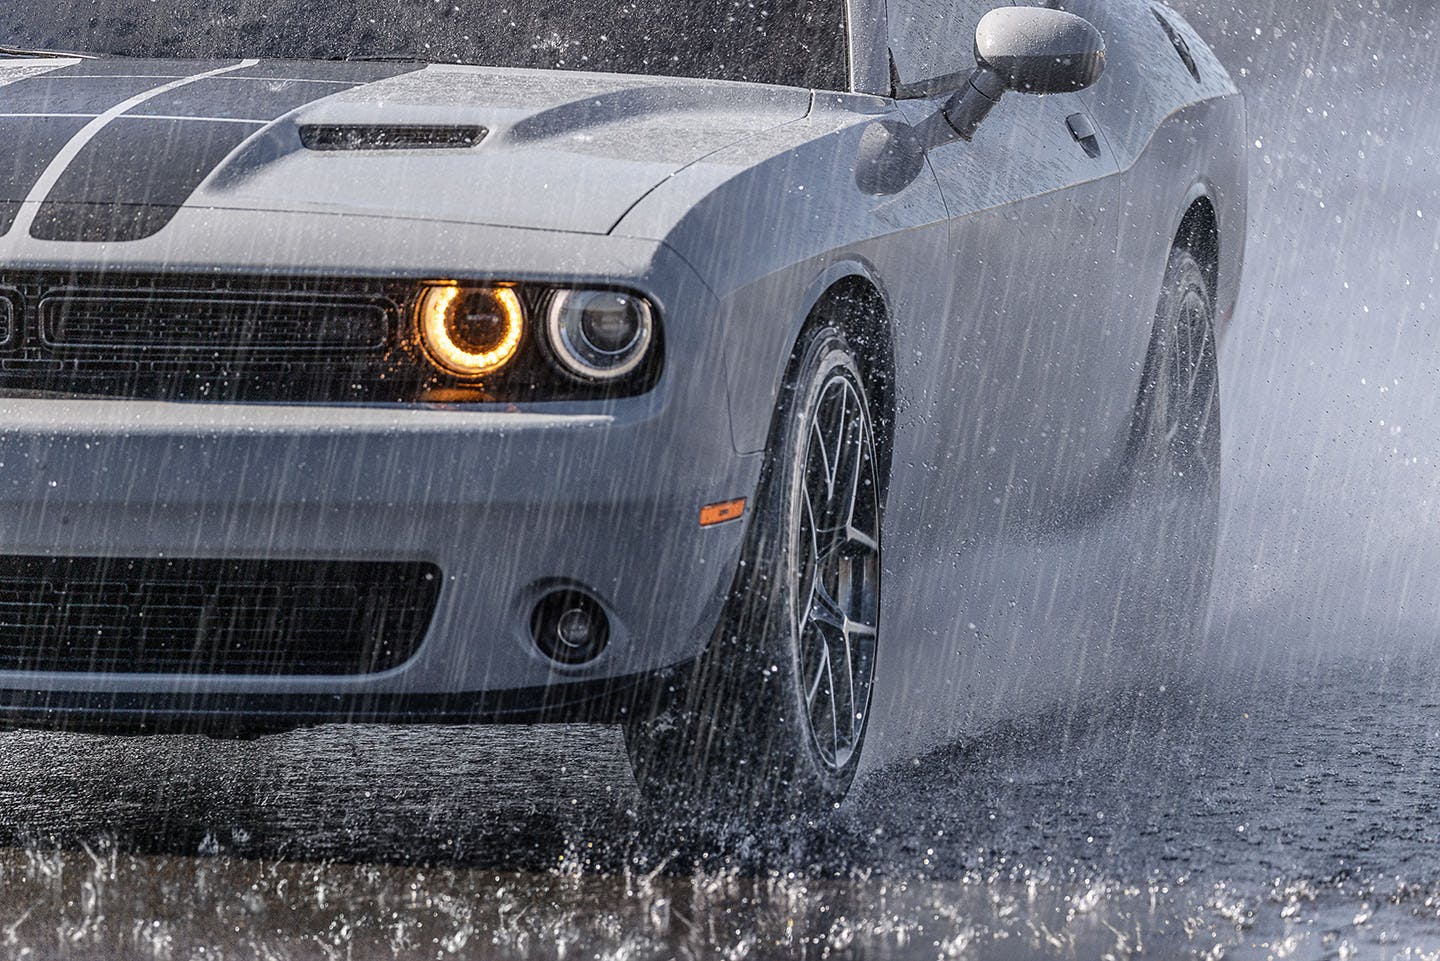 Image of a muscle car driving through the rain.